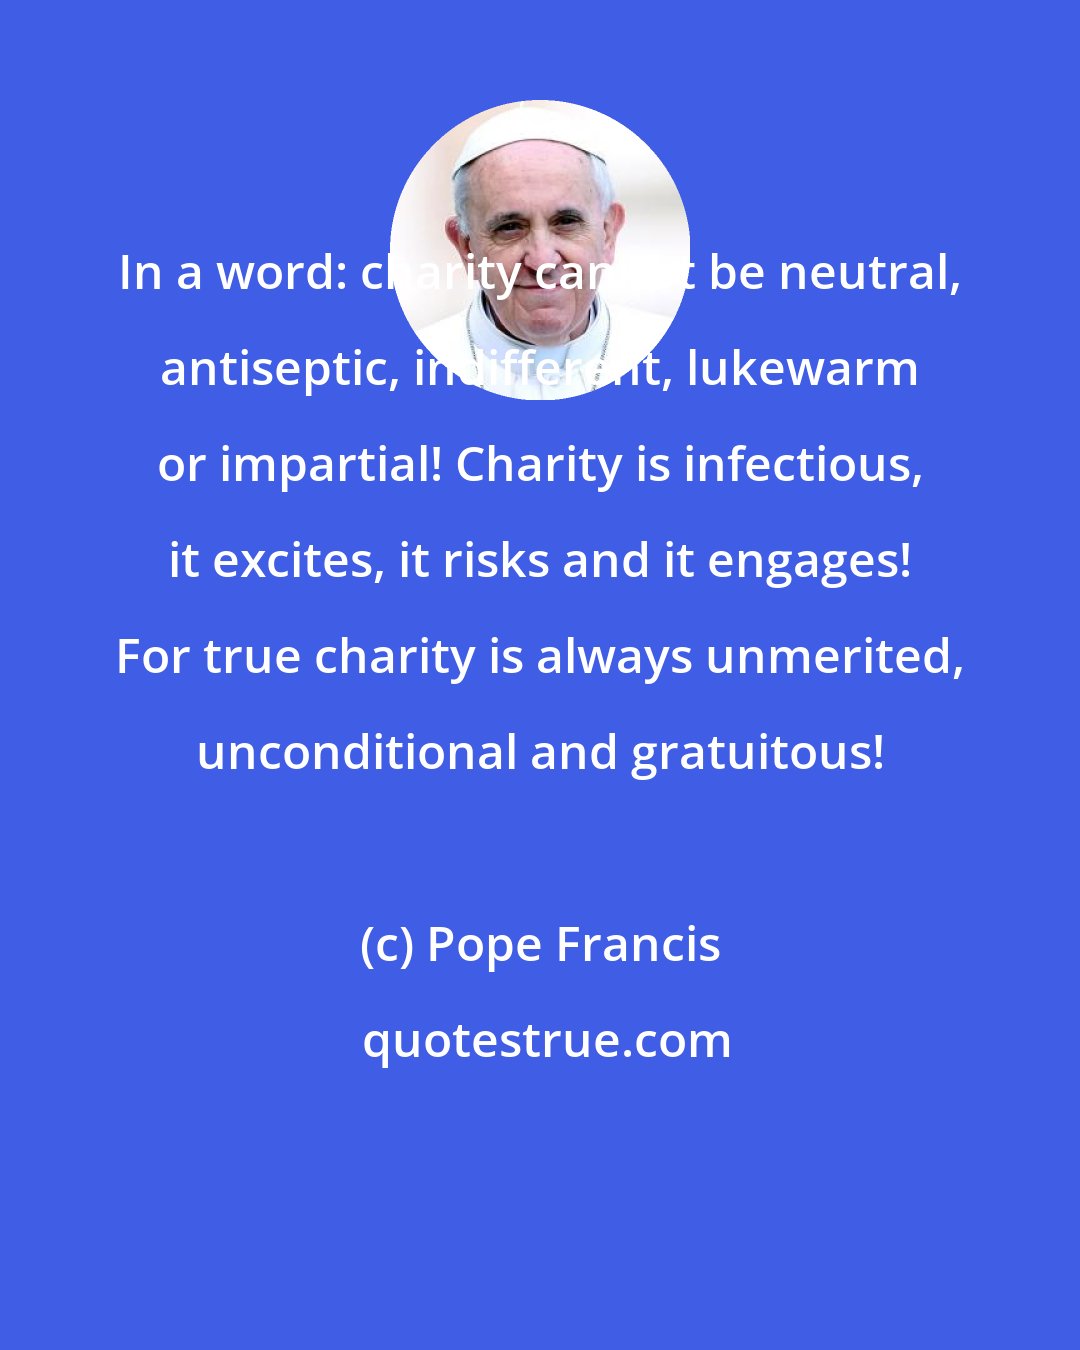 Pope Francis: In a word: charity cannot be neutral, antiseptic, indifferent, lukewarm or impartial! Charity is infectious, it excites, it risks and it engages! For true charity is always unmerited, unconditional and gratuitous!